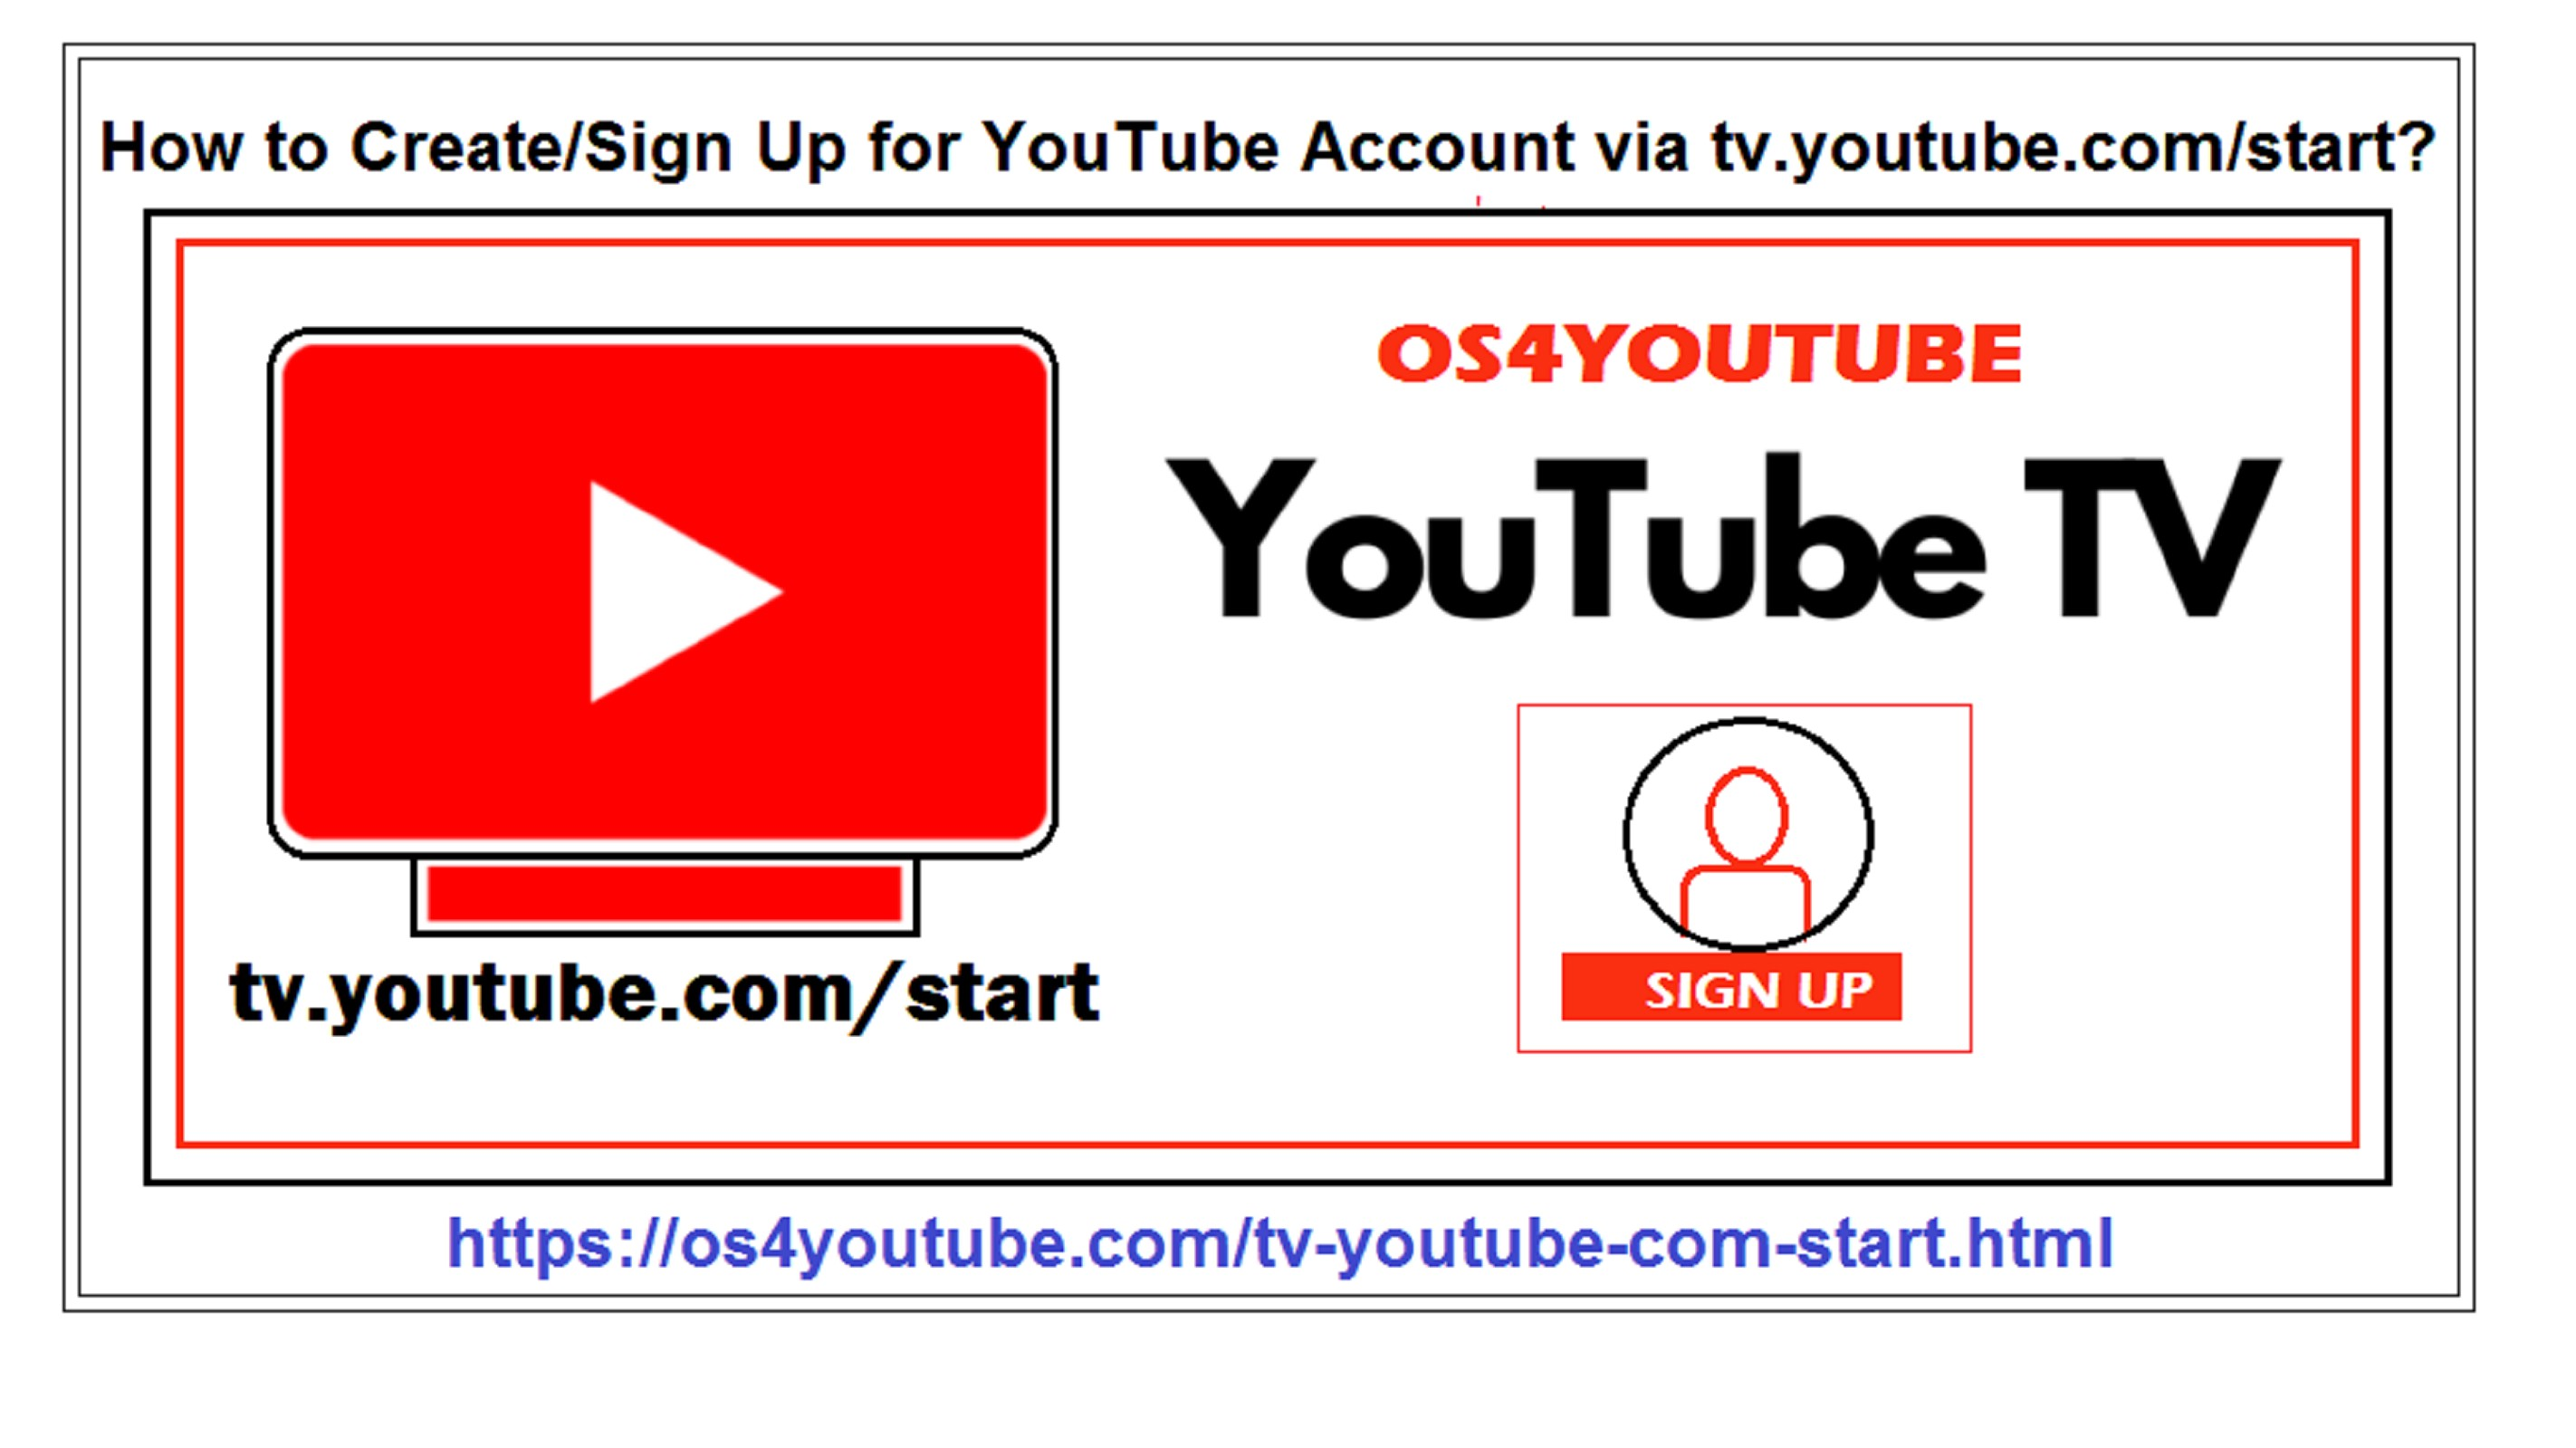 How to Create/Sign Up for YouTube Account via tv.youtube.com/start?